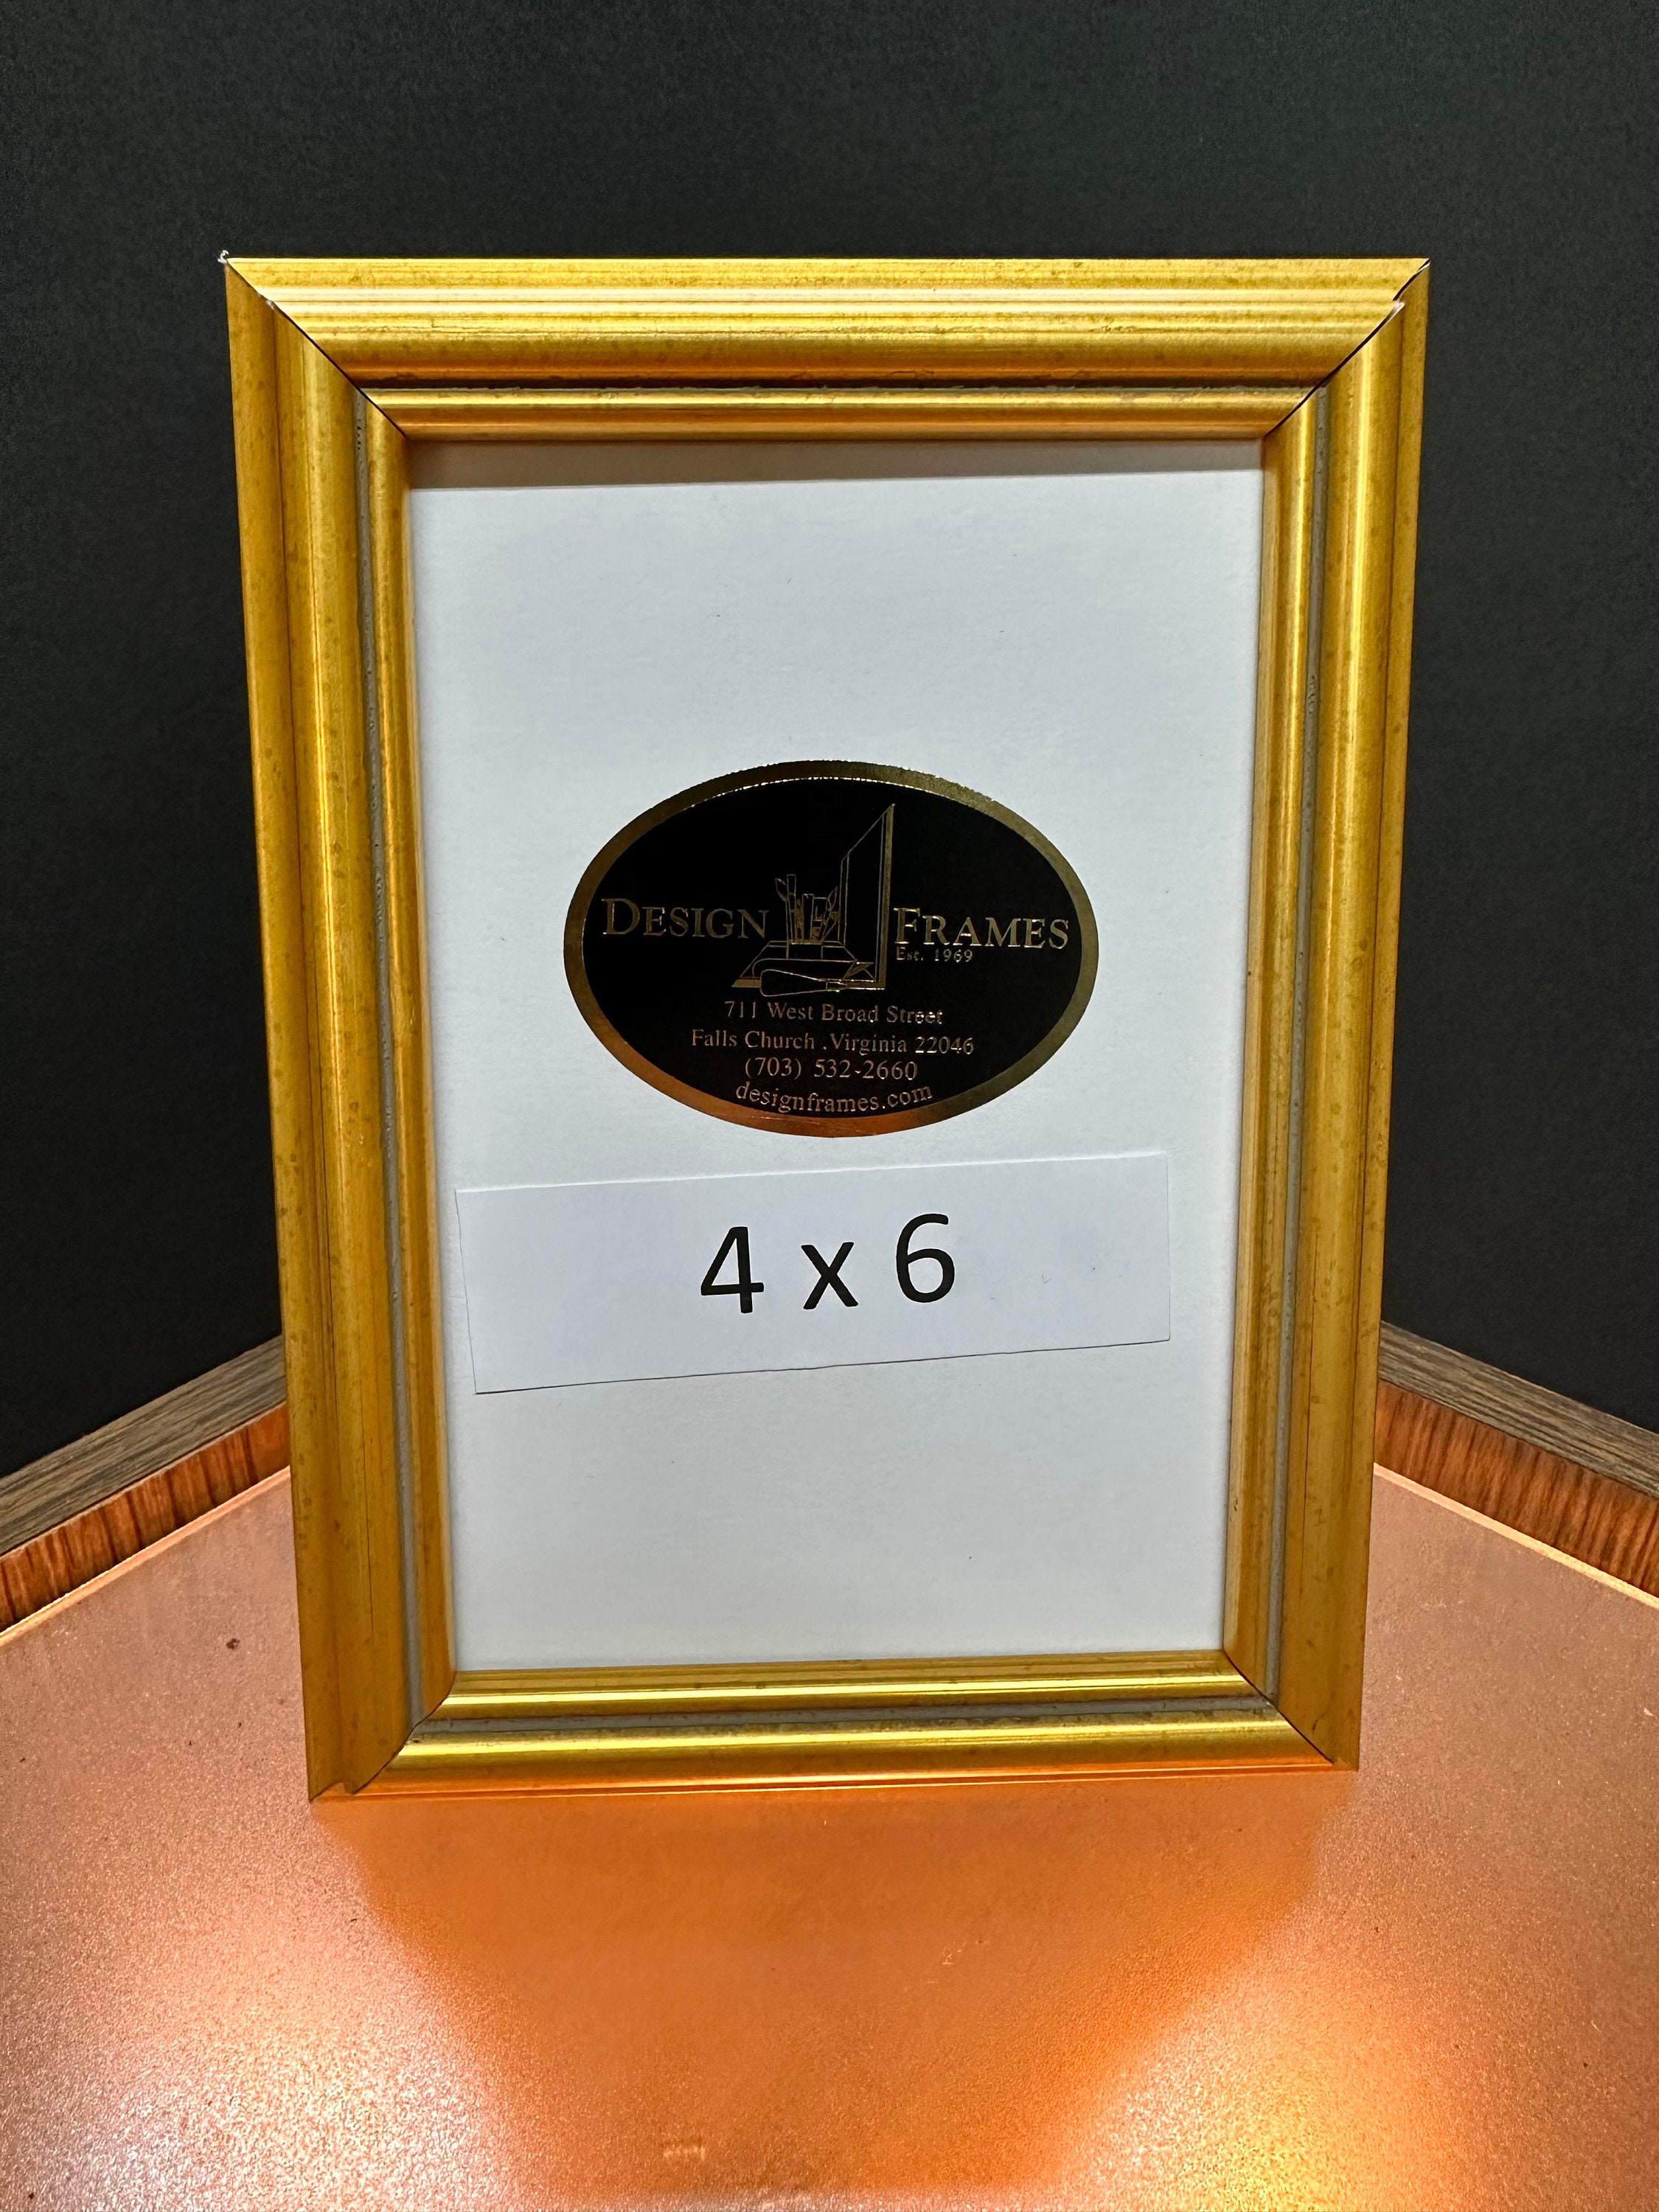 Antique Gold Ornate 4 x 6 Frame, Expressions™ by Studio Décor